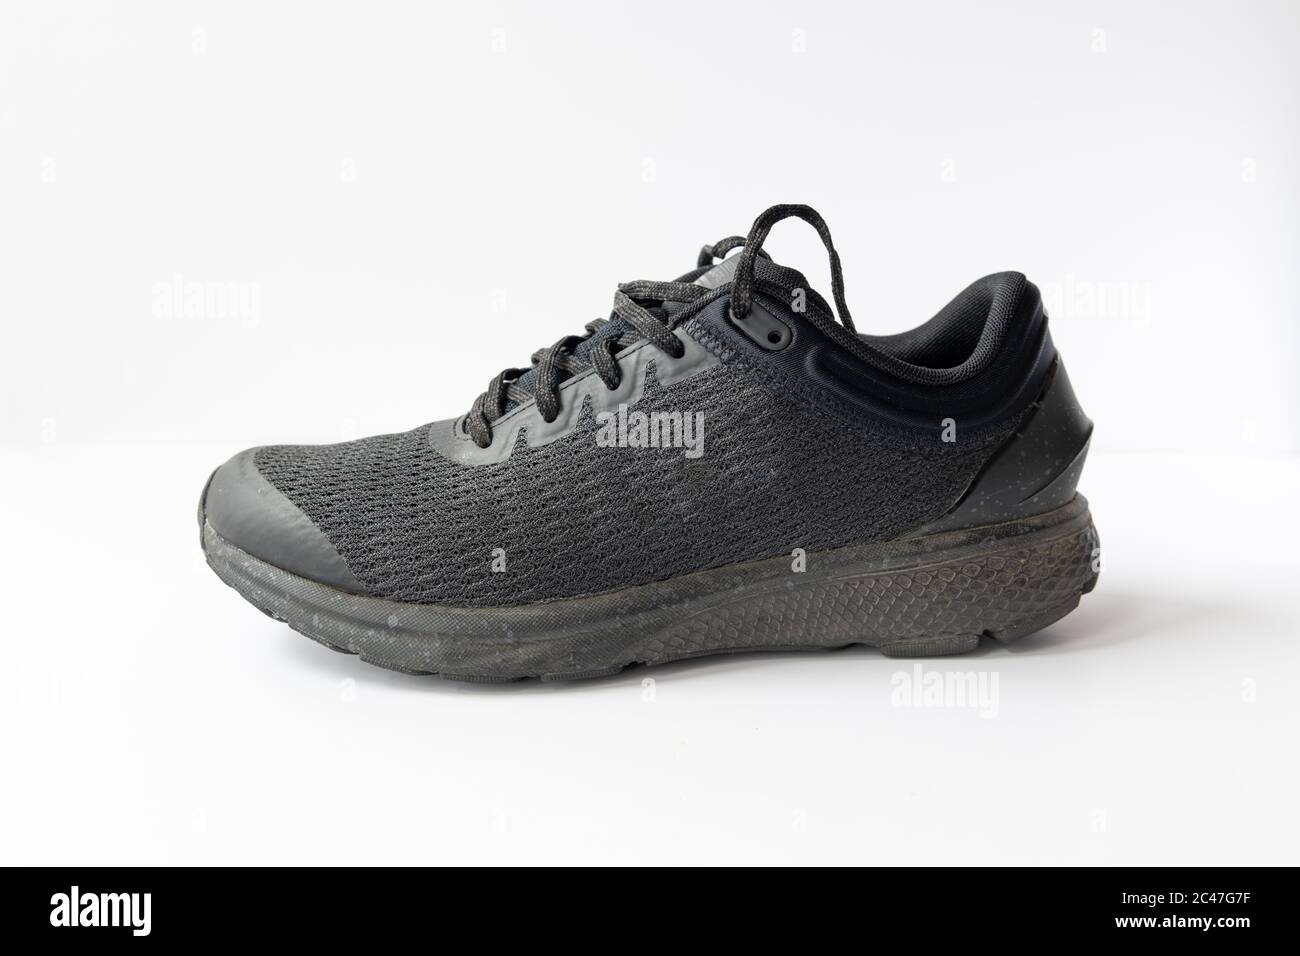 Isolated image of a black trainer, running shoe. Stock Photo